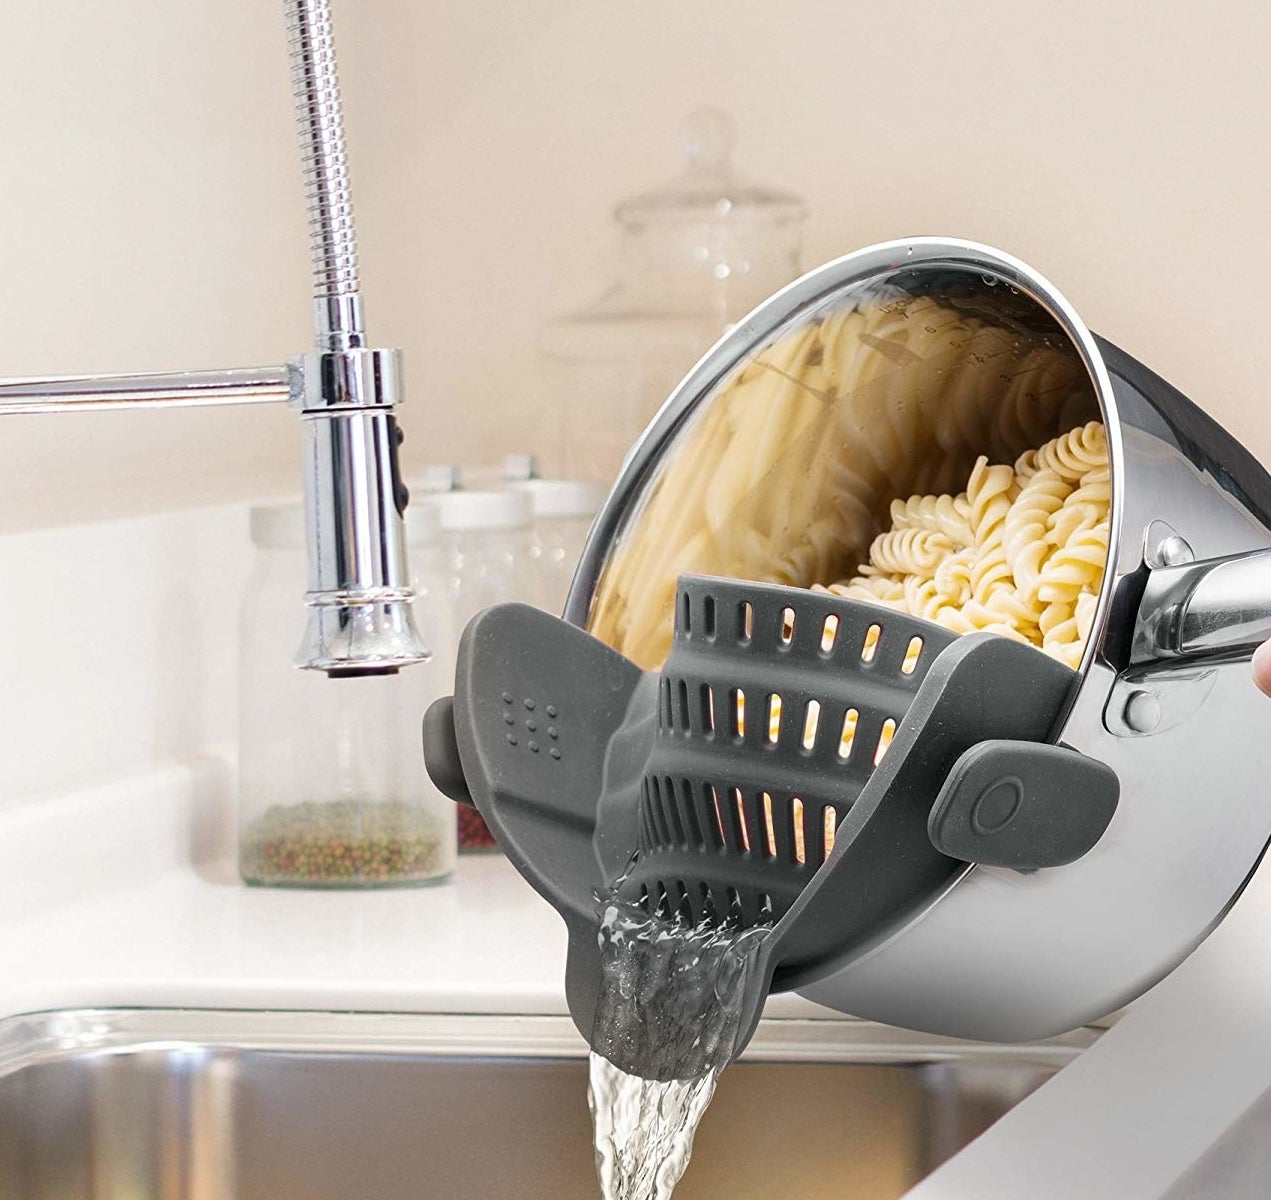 The strainer attached to a pot, which allows the water to drain while keeping pasta in place